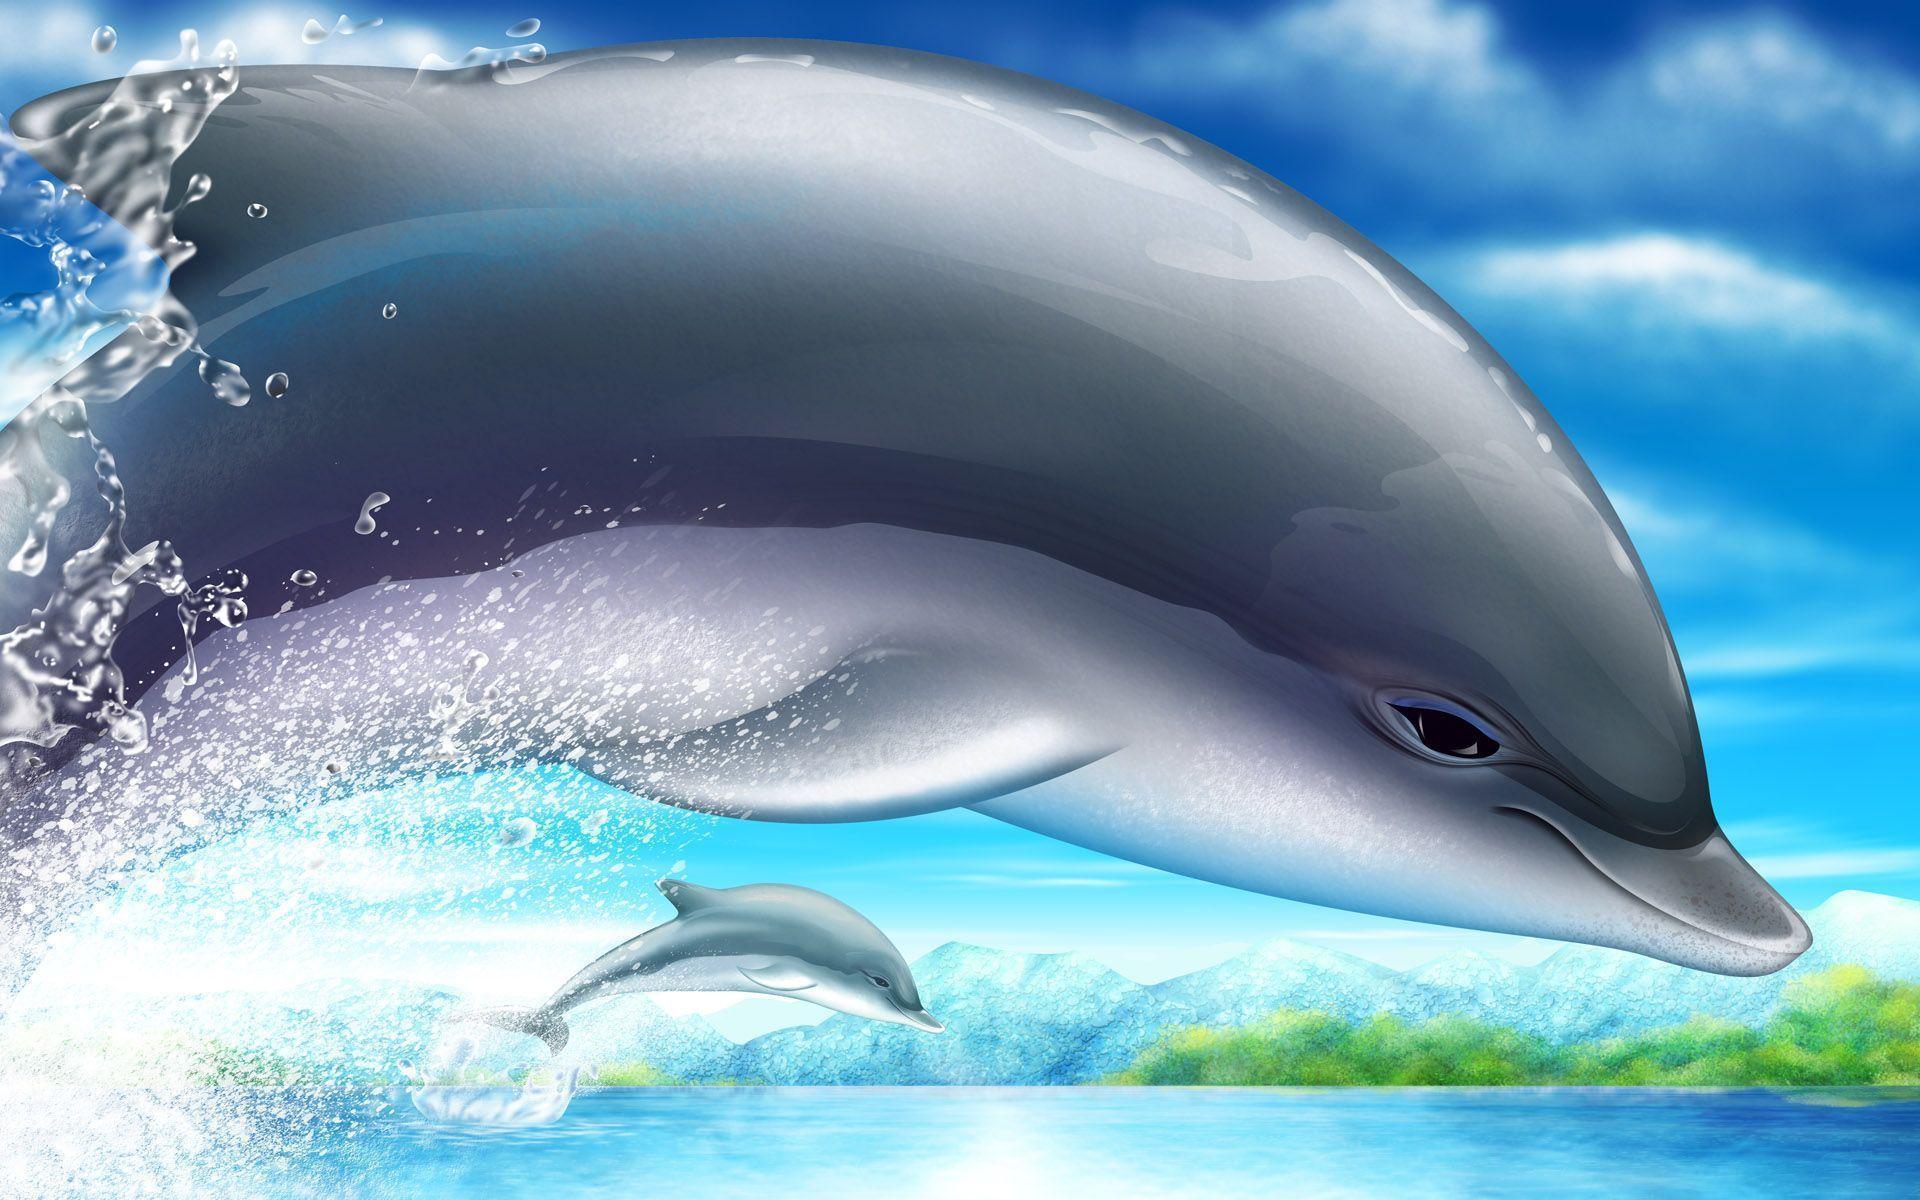 3840x2400 miami dolphins wallpaper free hd widescreen - Coolwallpapers.me!